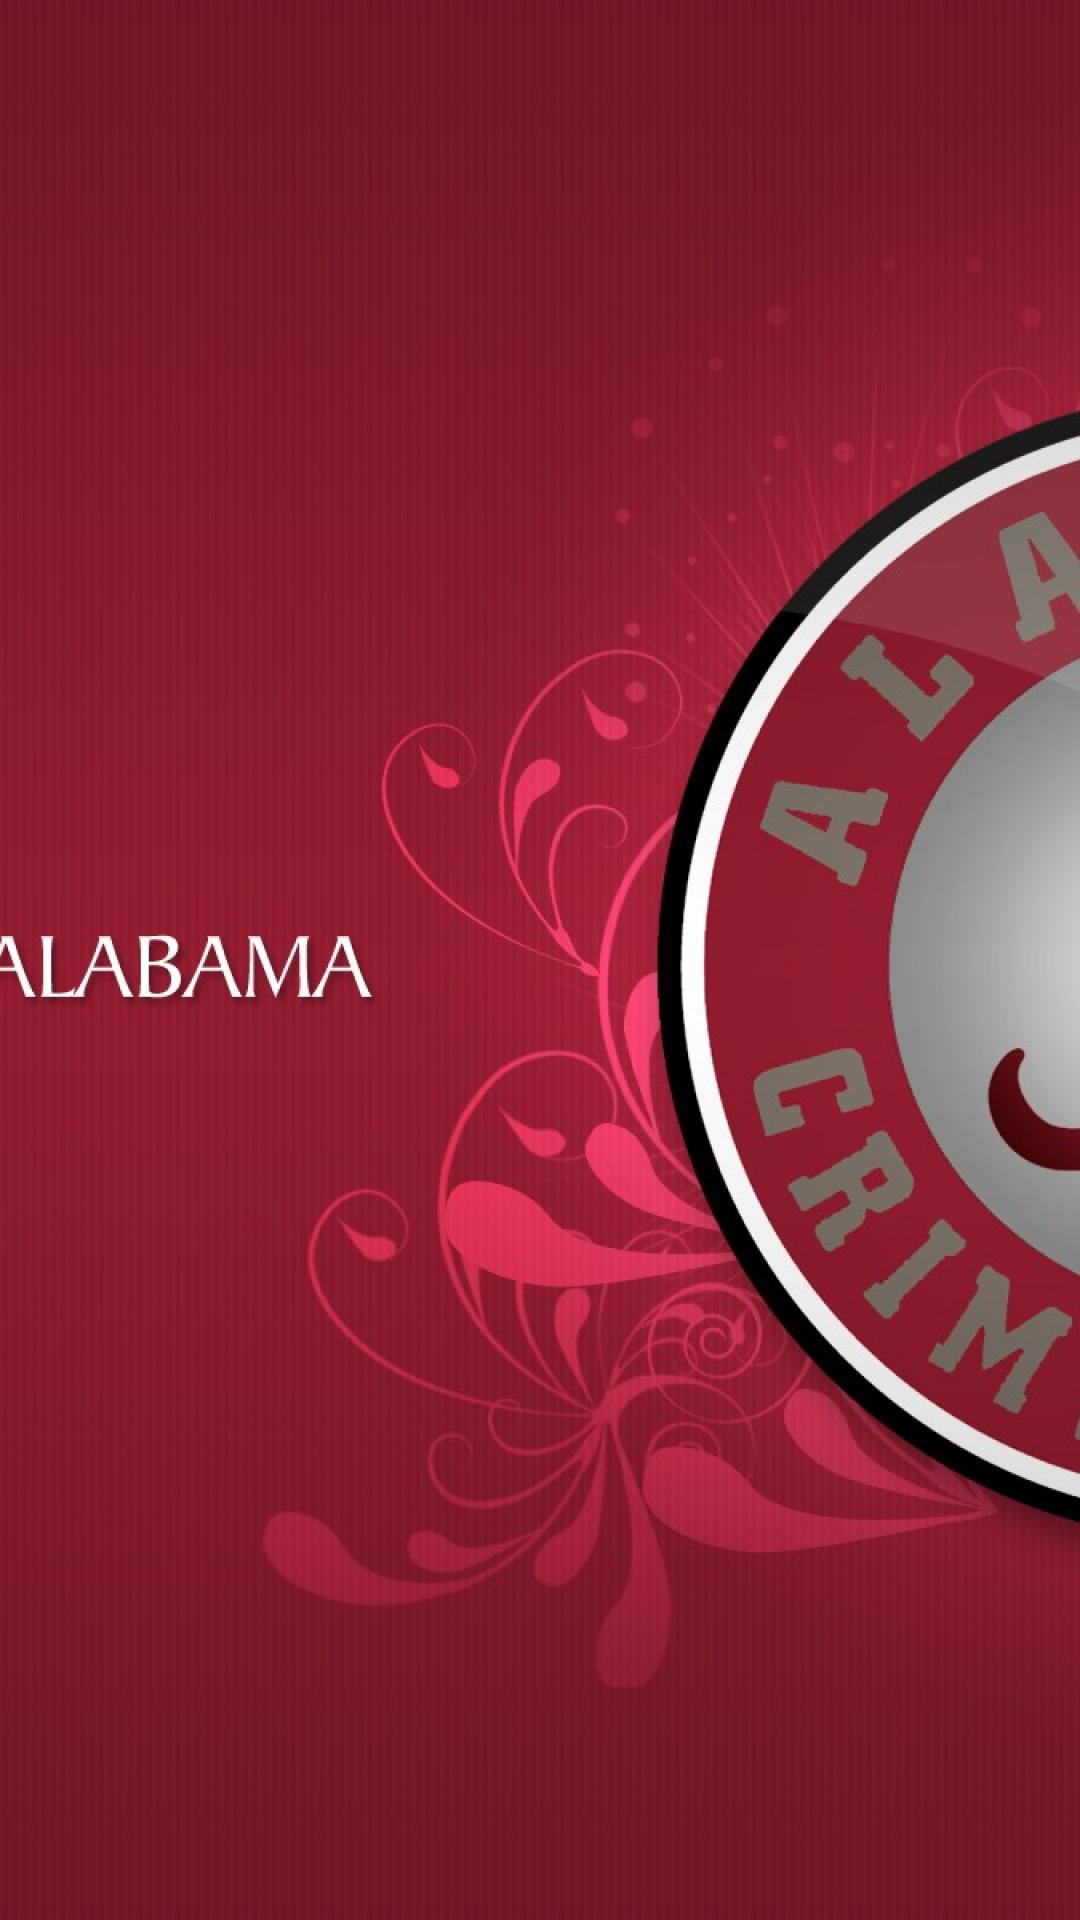 Alabama Football Wallpaper For Cell Phones - Graphic Design , HD Wallpaper & Backgrounds